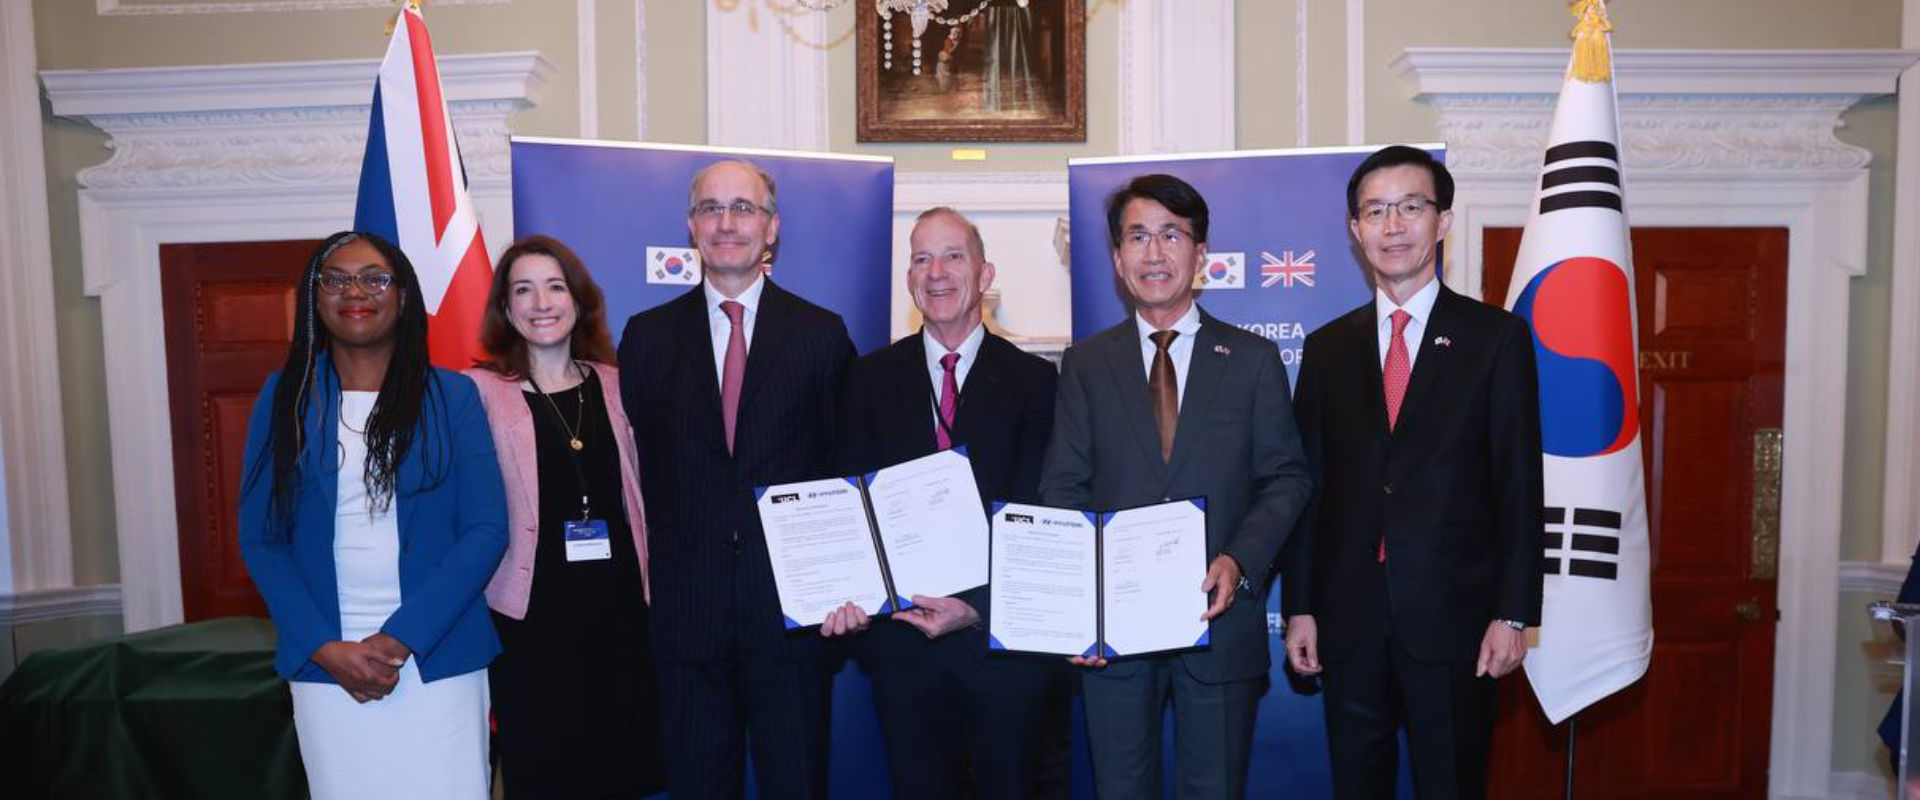 Hyundai Motor Company and University College London to Collaborate on Carbon-Free Future Technologies